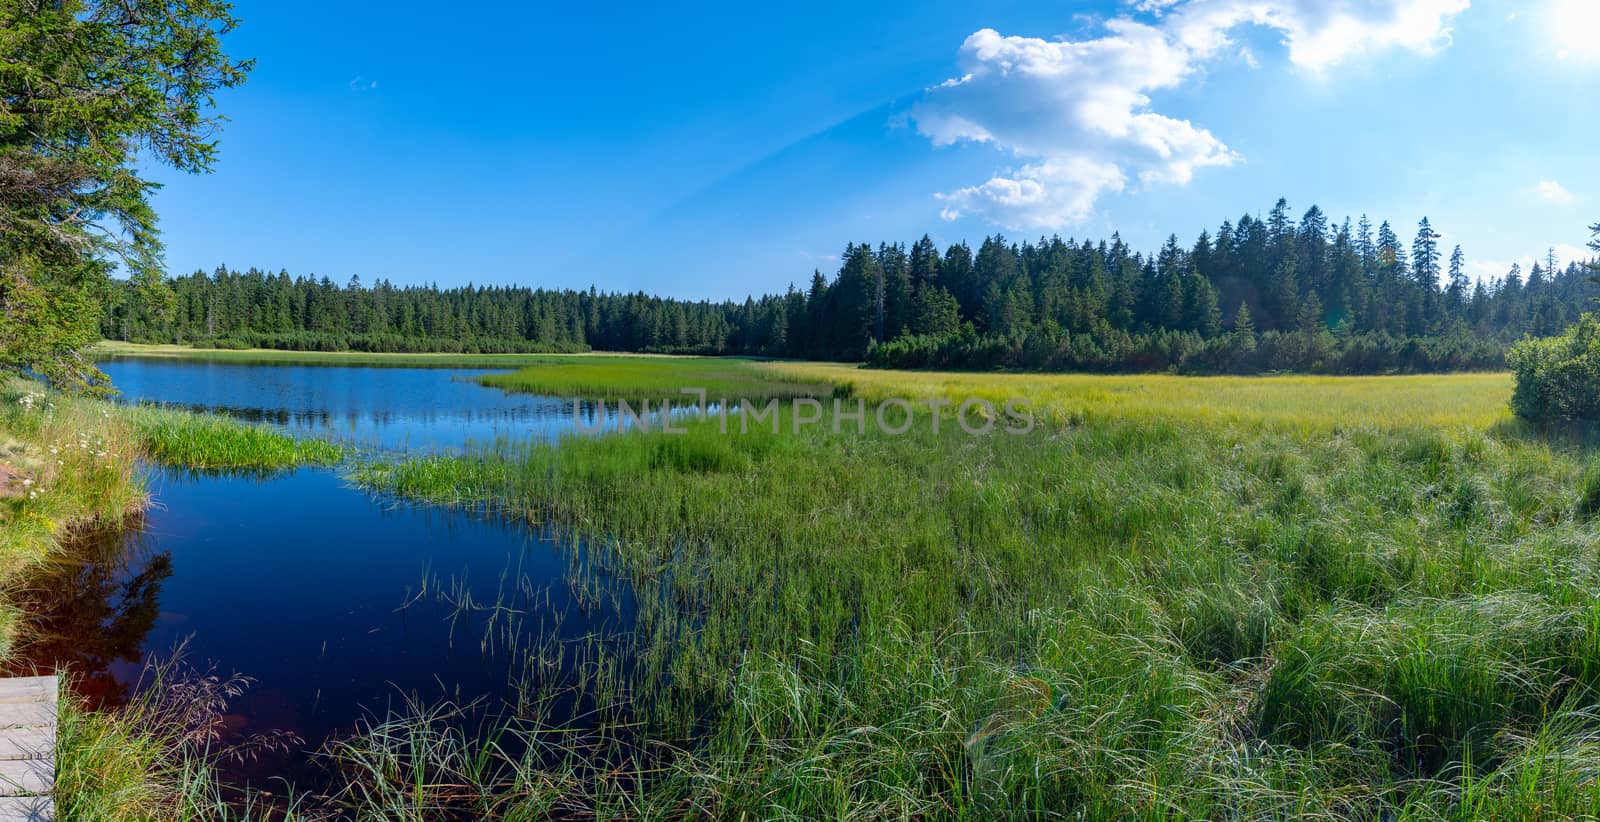 Lake on top of mountain, dark colored water and vibrant green grass, surrounded with trees, Crno jezero or Black lake is a popular hiking destination on Pohorje, Slovenia